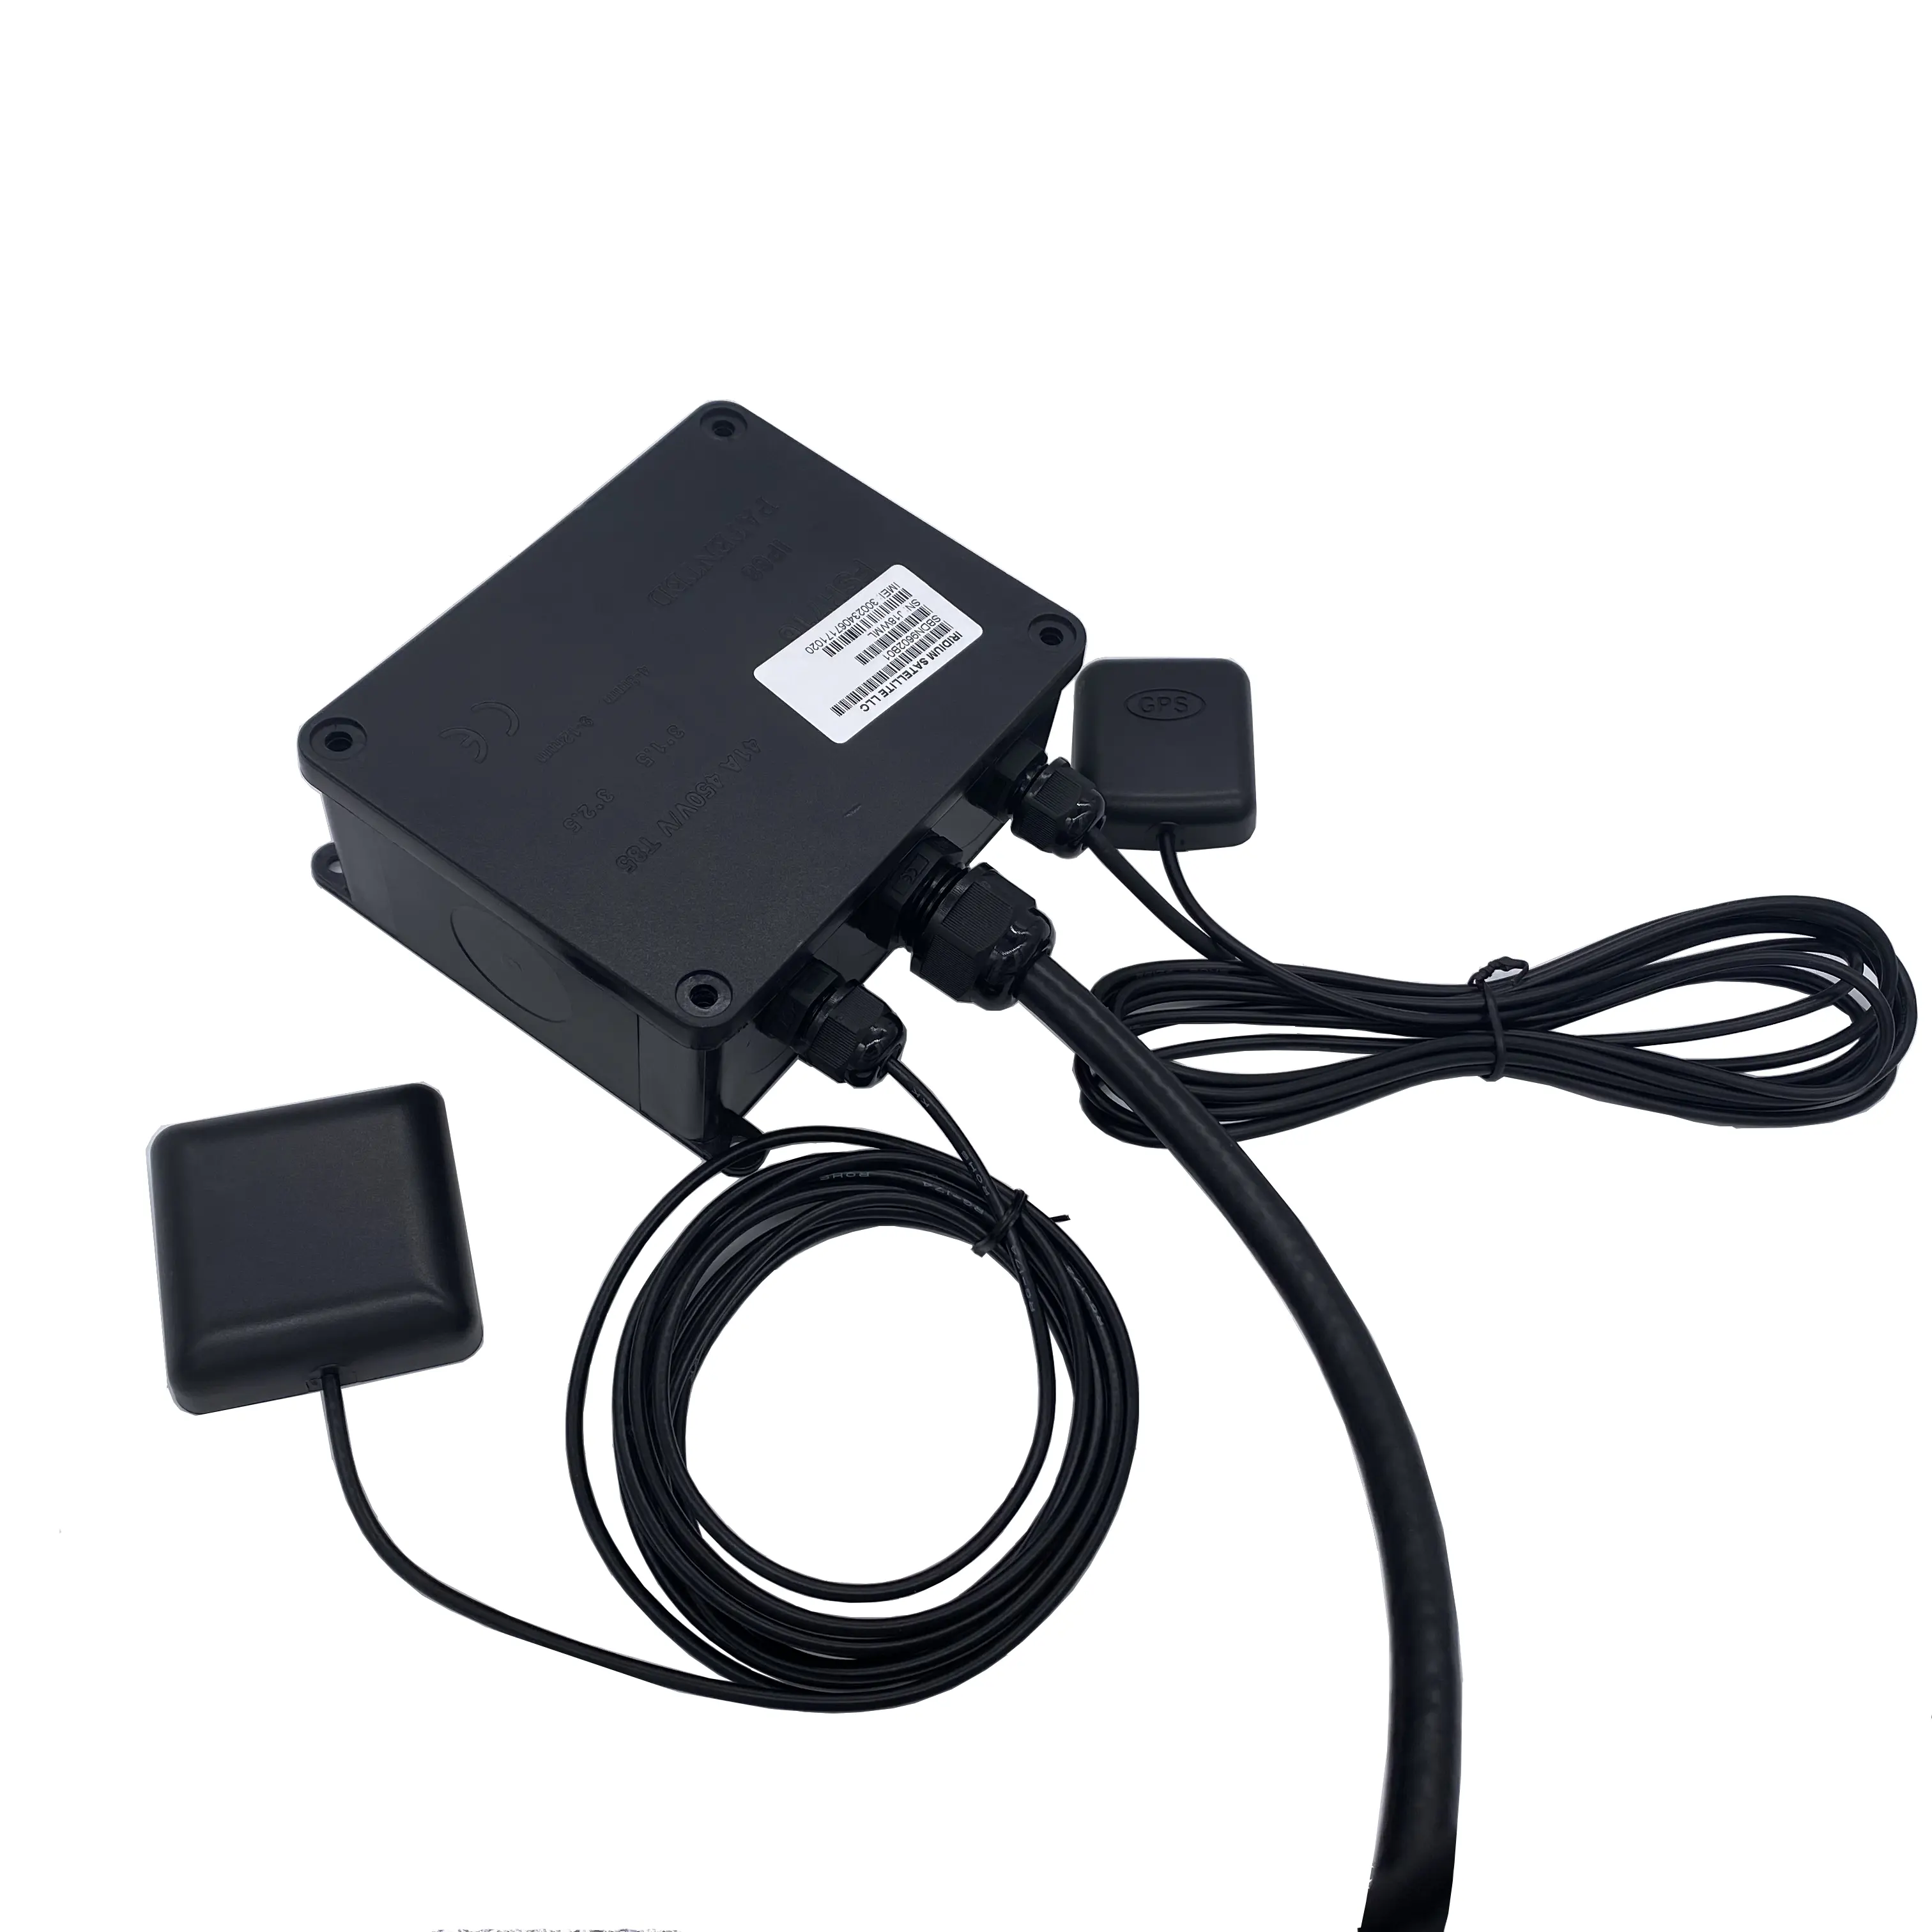 Satellite GPS tracker (no GPS signal required) With Iridium LEO satellite connected for boat/vessel/vehicle